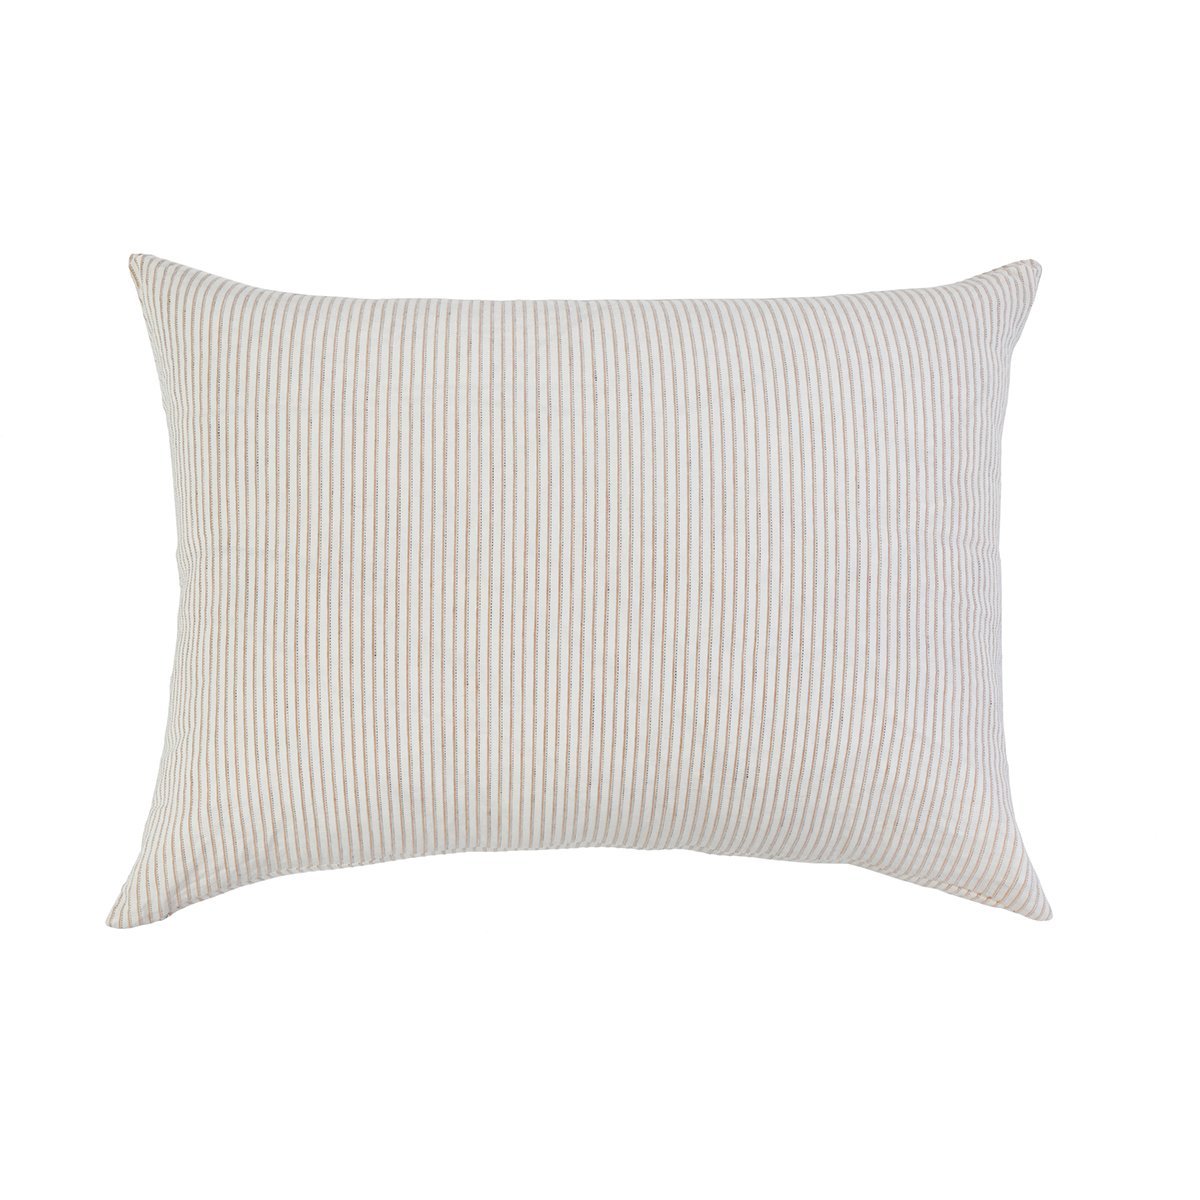 CONNOR BIG PILLOW 28" X 36" WITH INSERT - Ivory/Amber -Pom Pom at Home